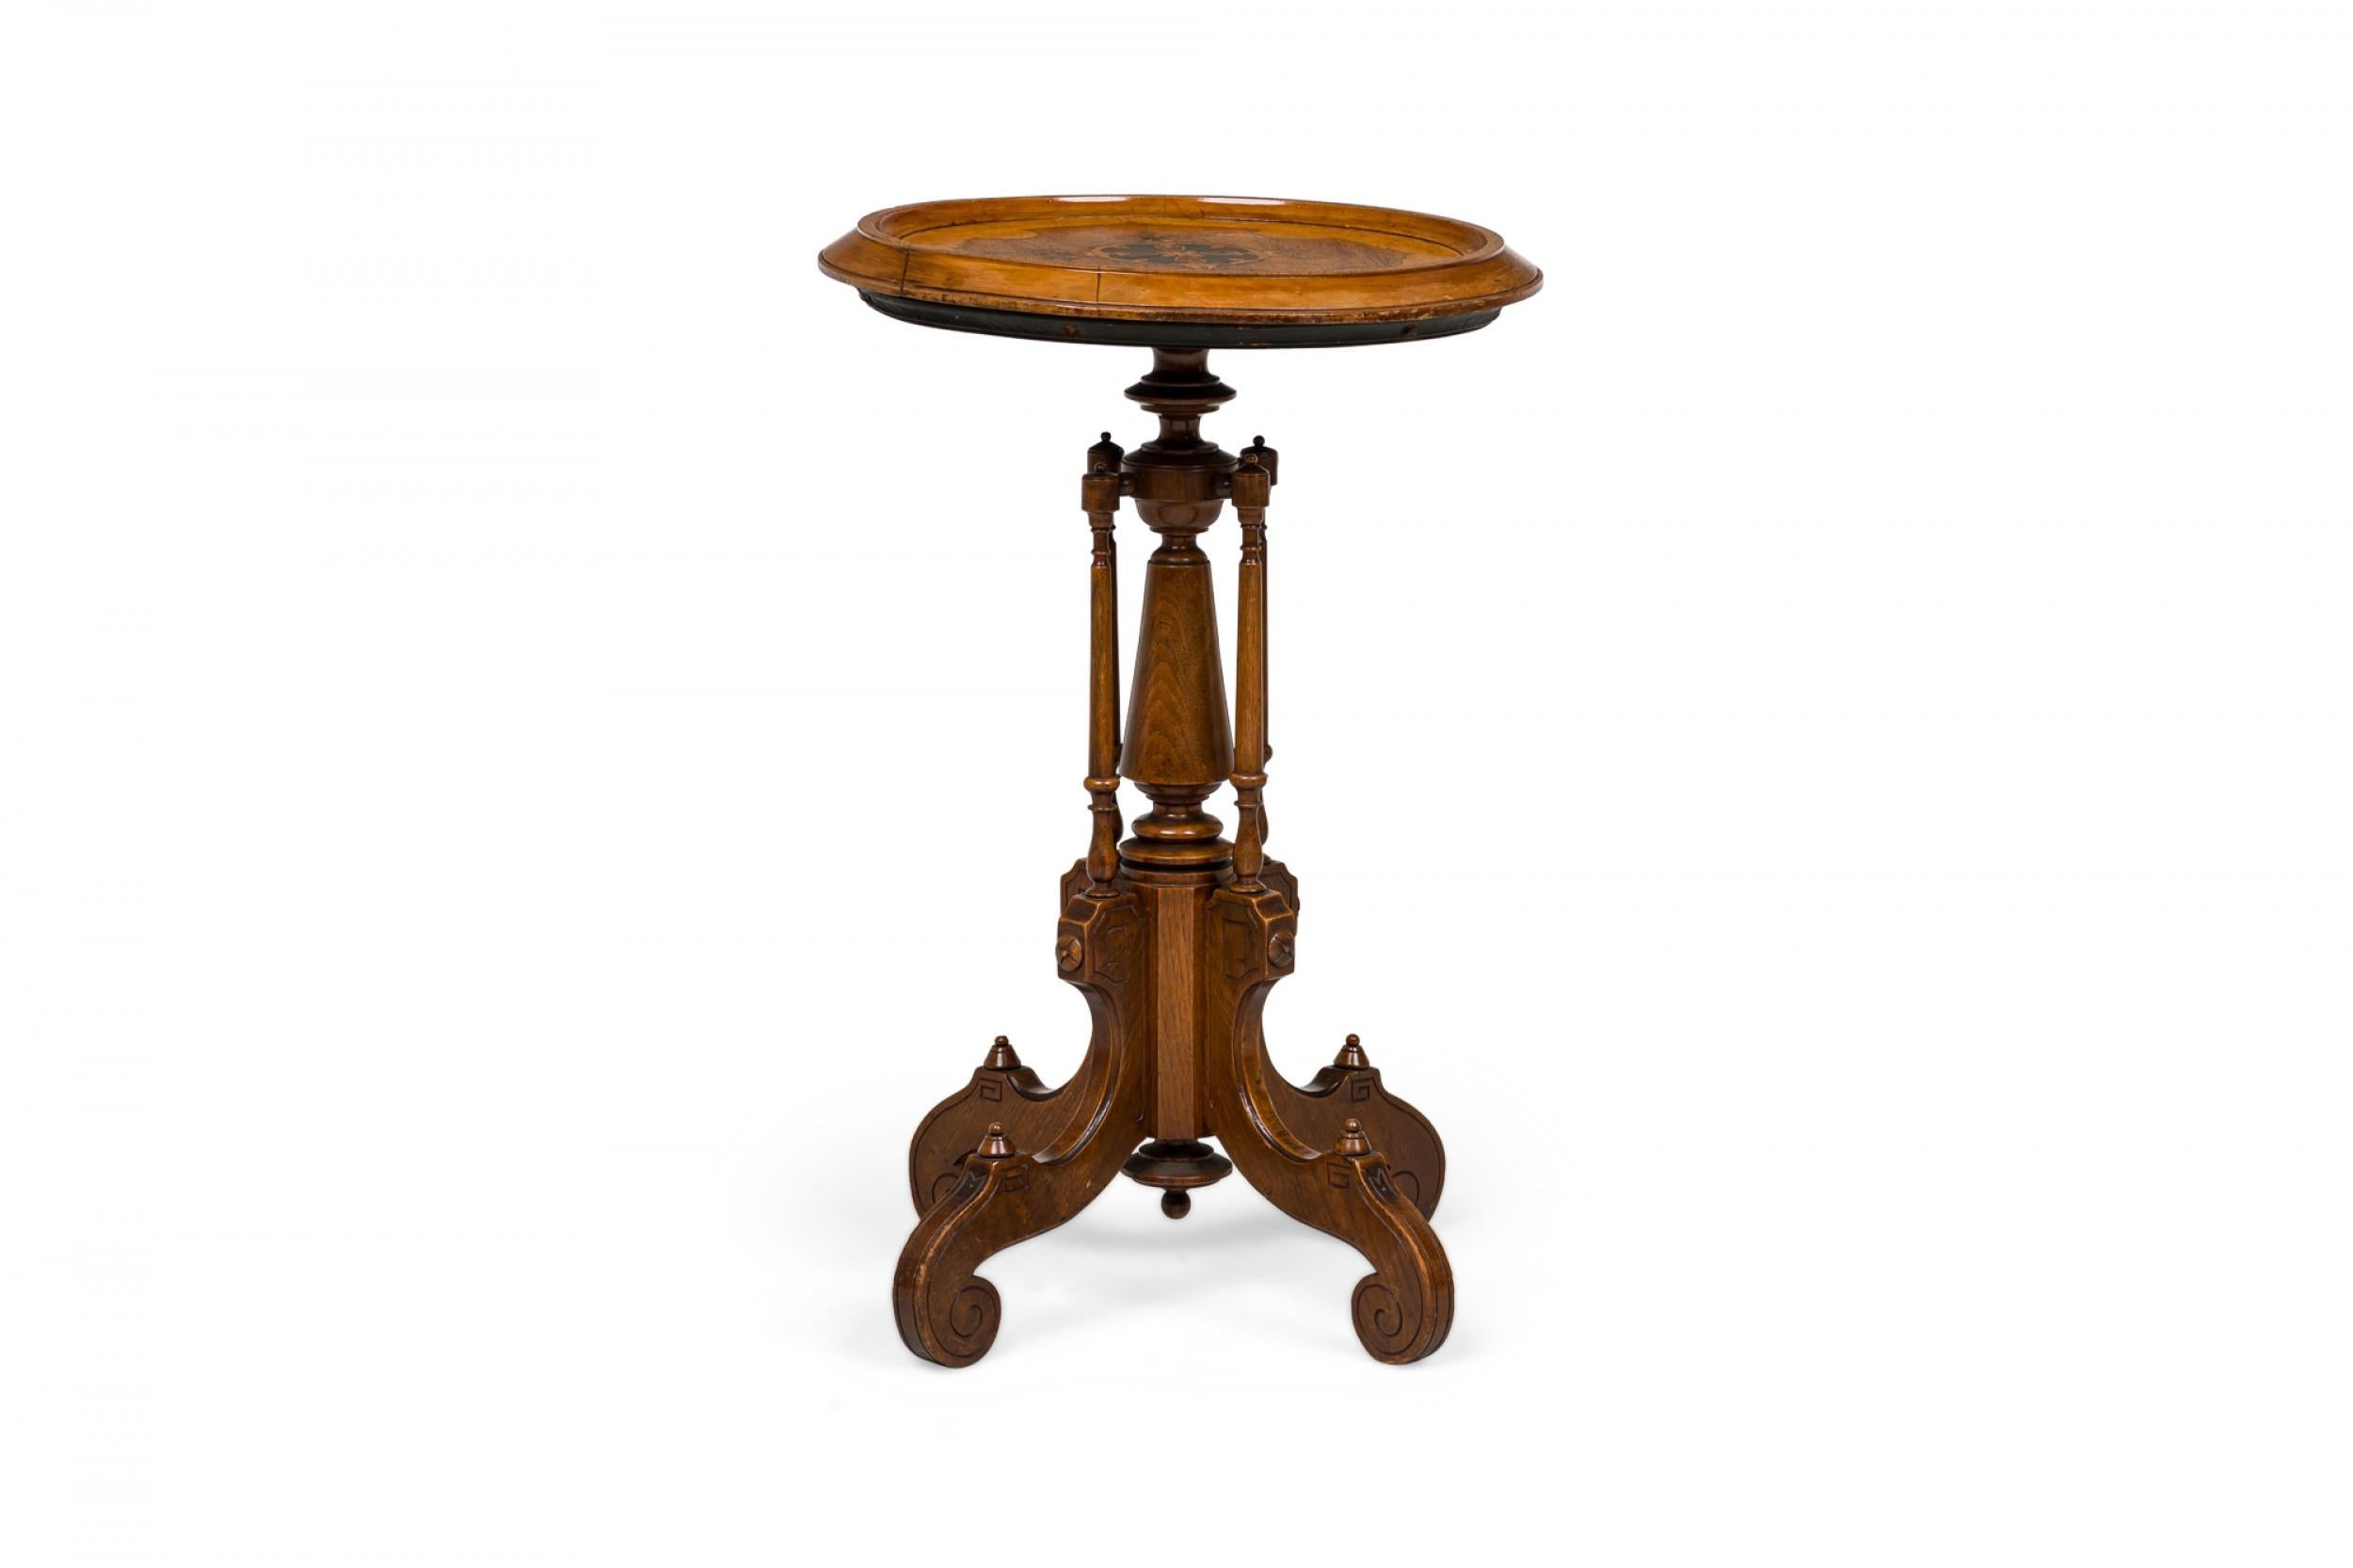 Late 19th Century American Victorian Inlaid Circular Carved Wooden Plant Stand / Side Table For Sale